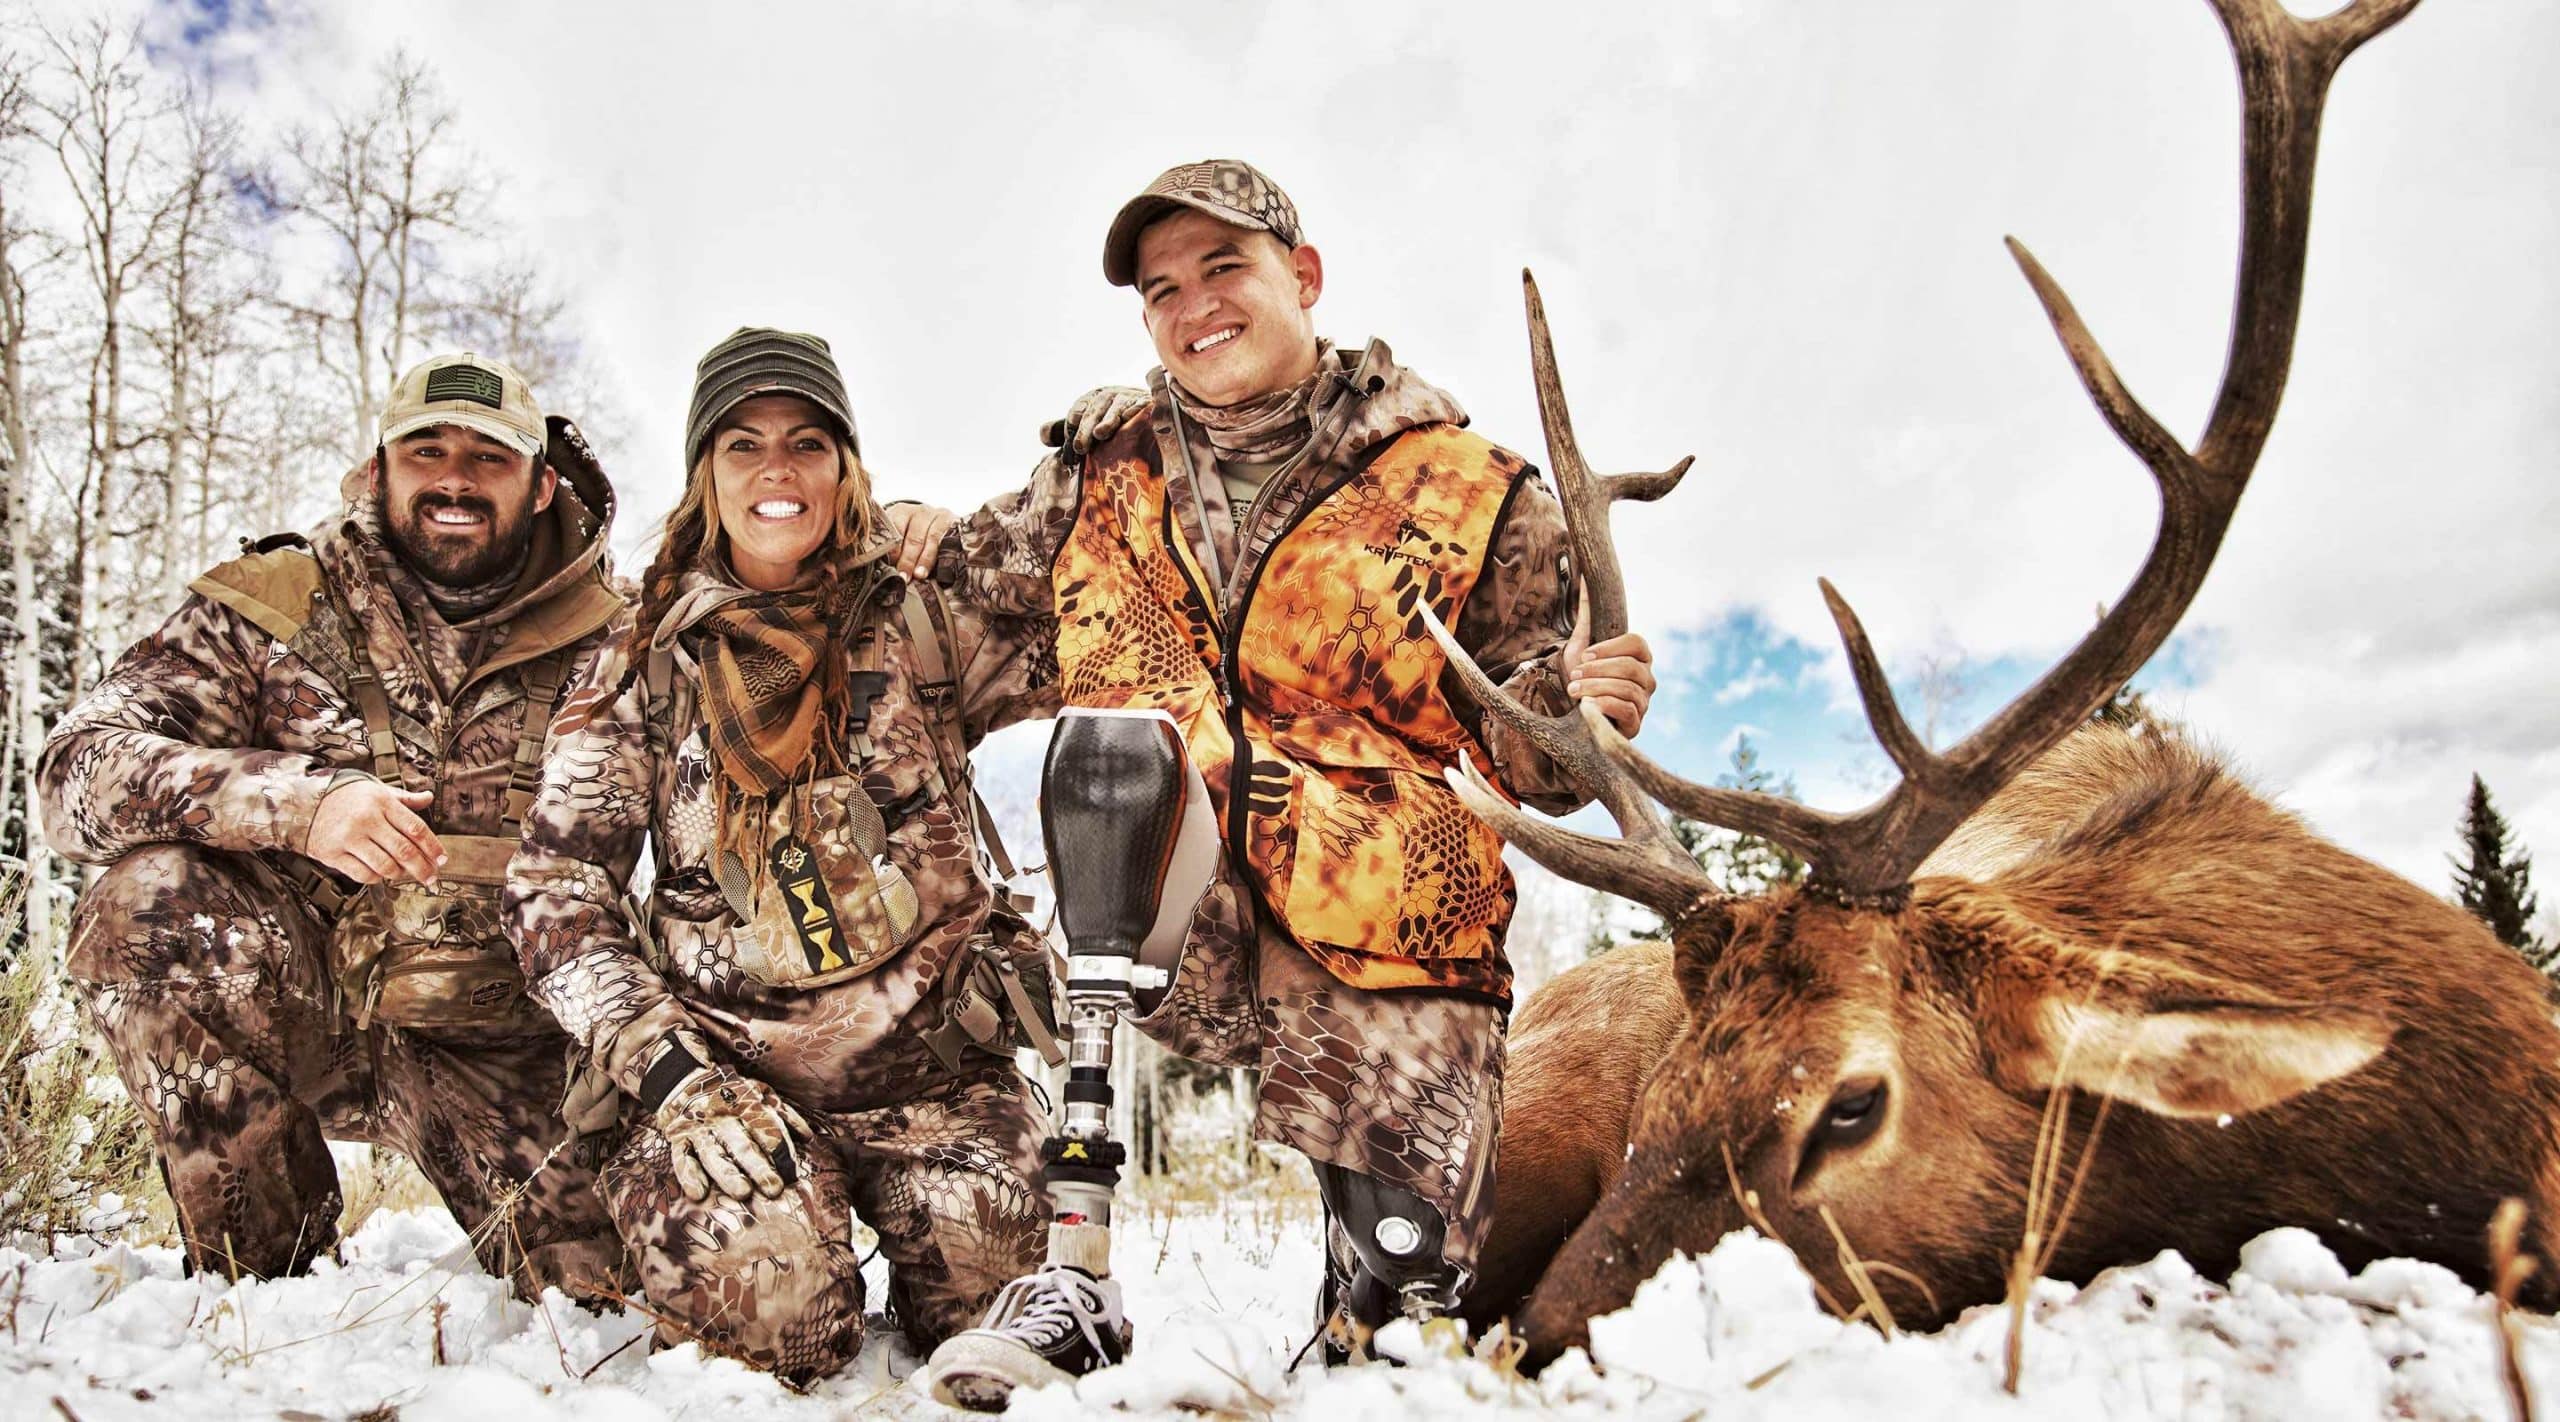 Jana Waller and friends with a late-season bull elk shot in the snow in Montana with former Navy SEAL Bo Reichenbach.